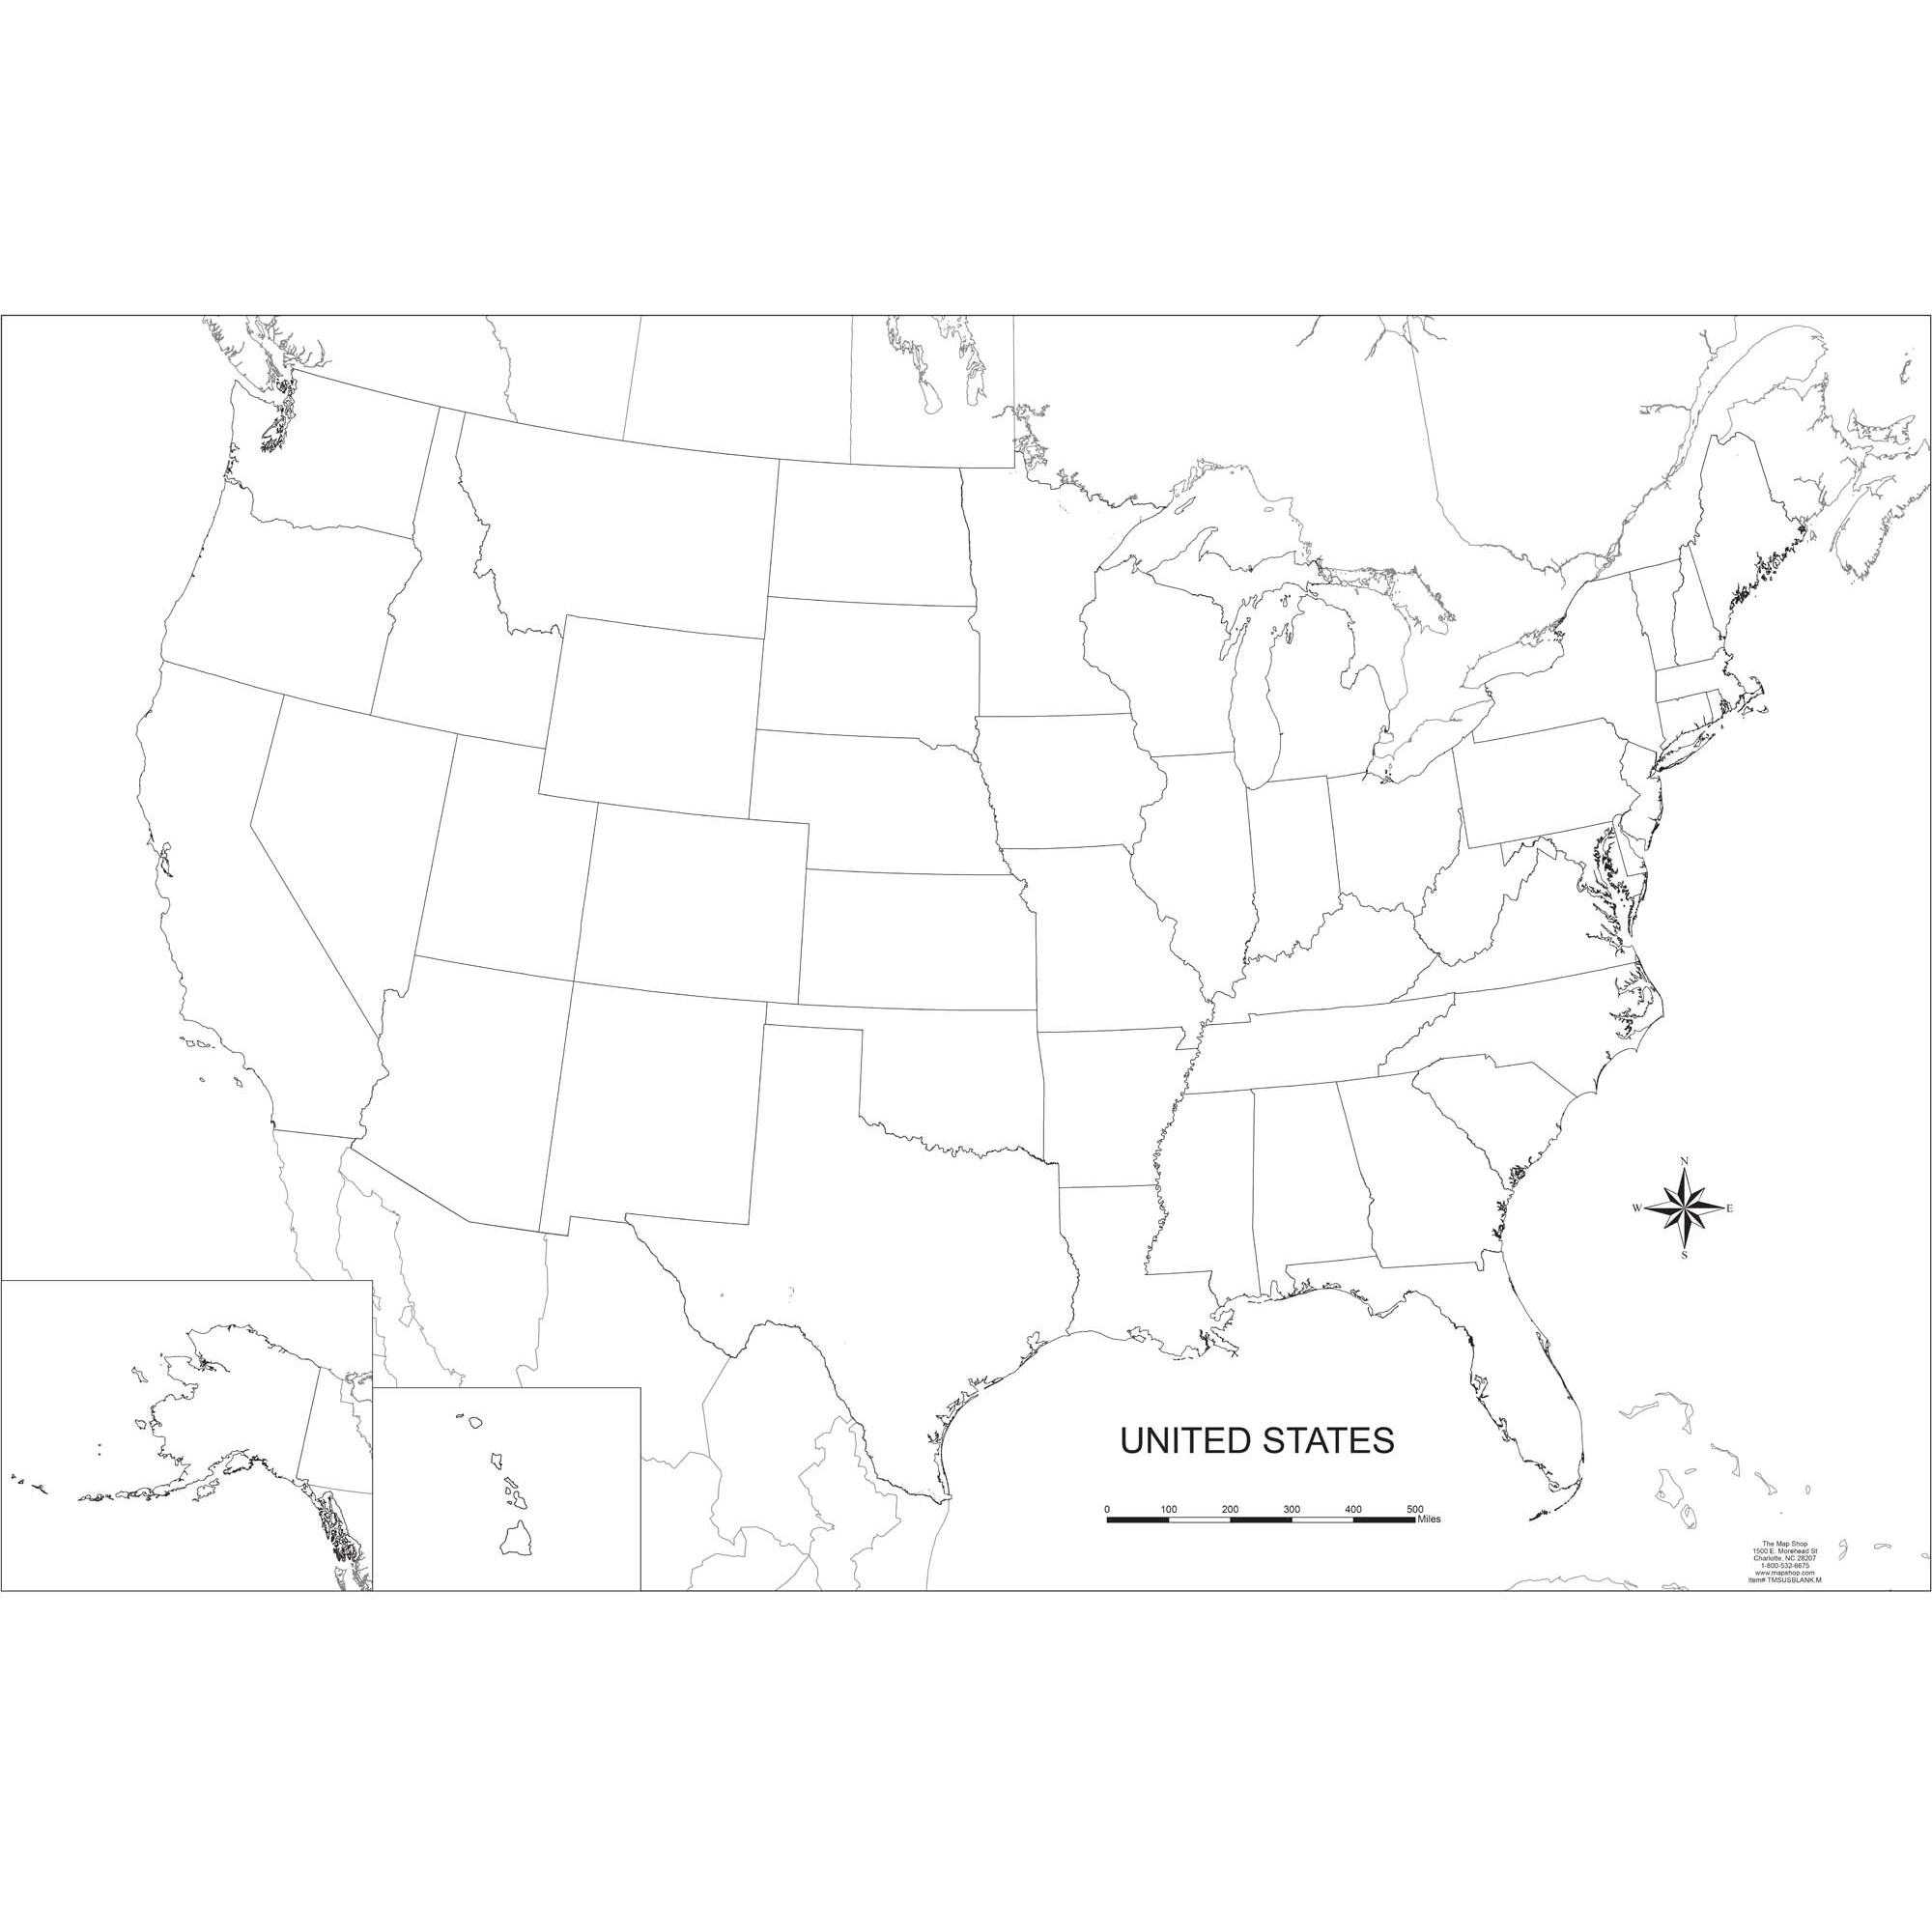 Blank United States Outline Wall Map Inside United States Map Template Blank